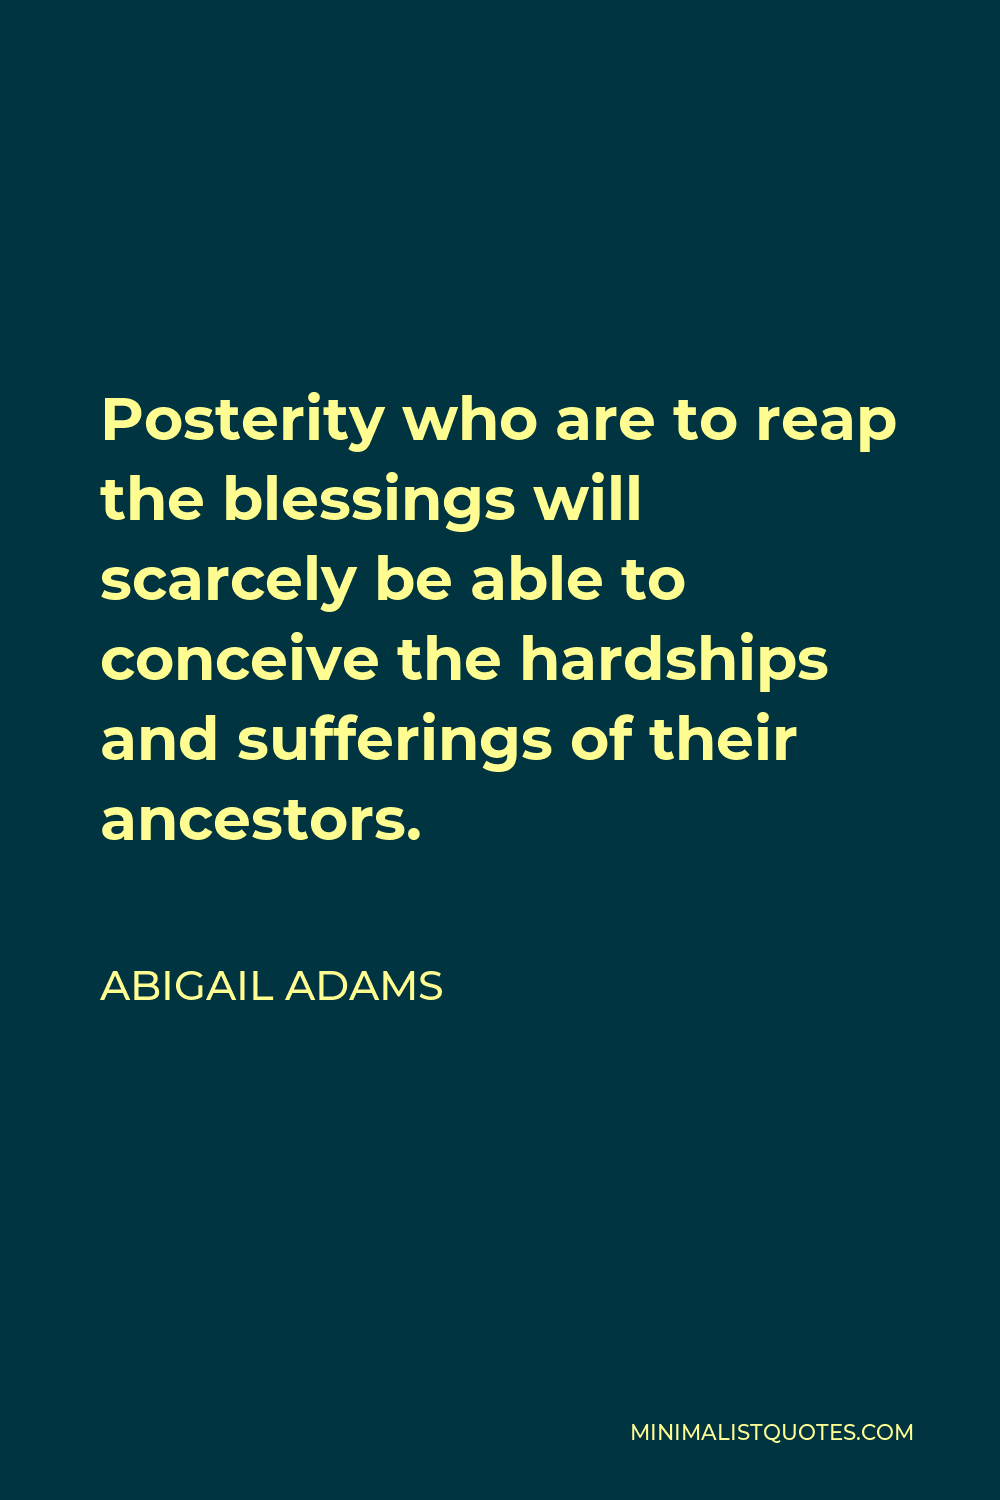 Abigail Adams Quote - Posterity who are to reap the blessings will scarcely be able to conceive the hardships and sufferings of their ancestors.